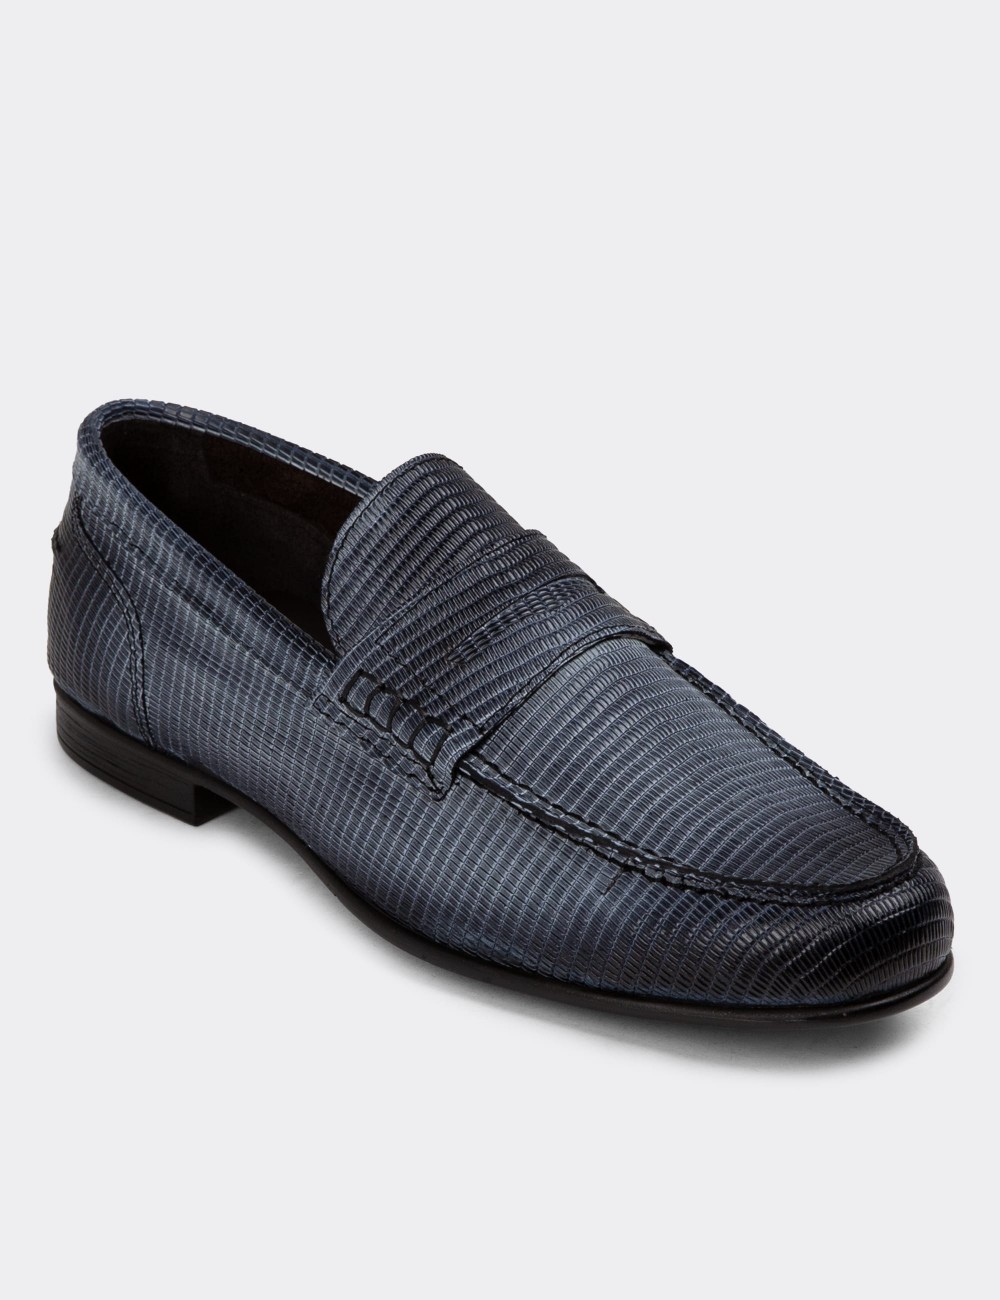 Gray Leather Loafers - 01978MGRIC01